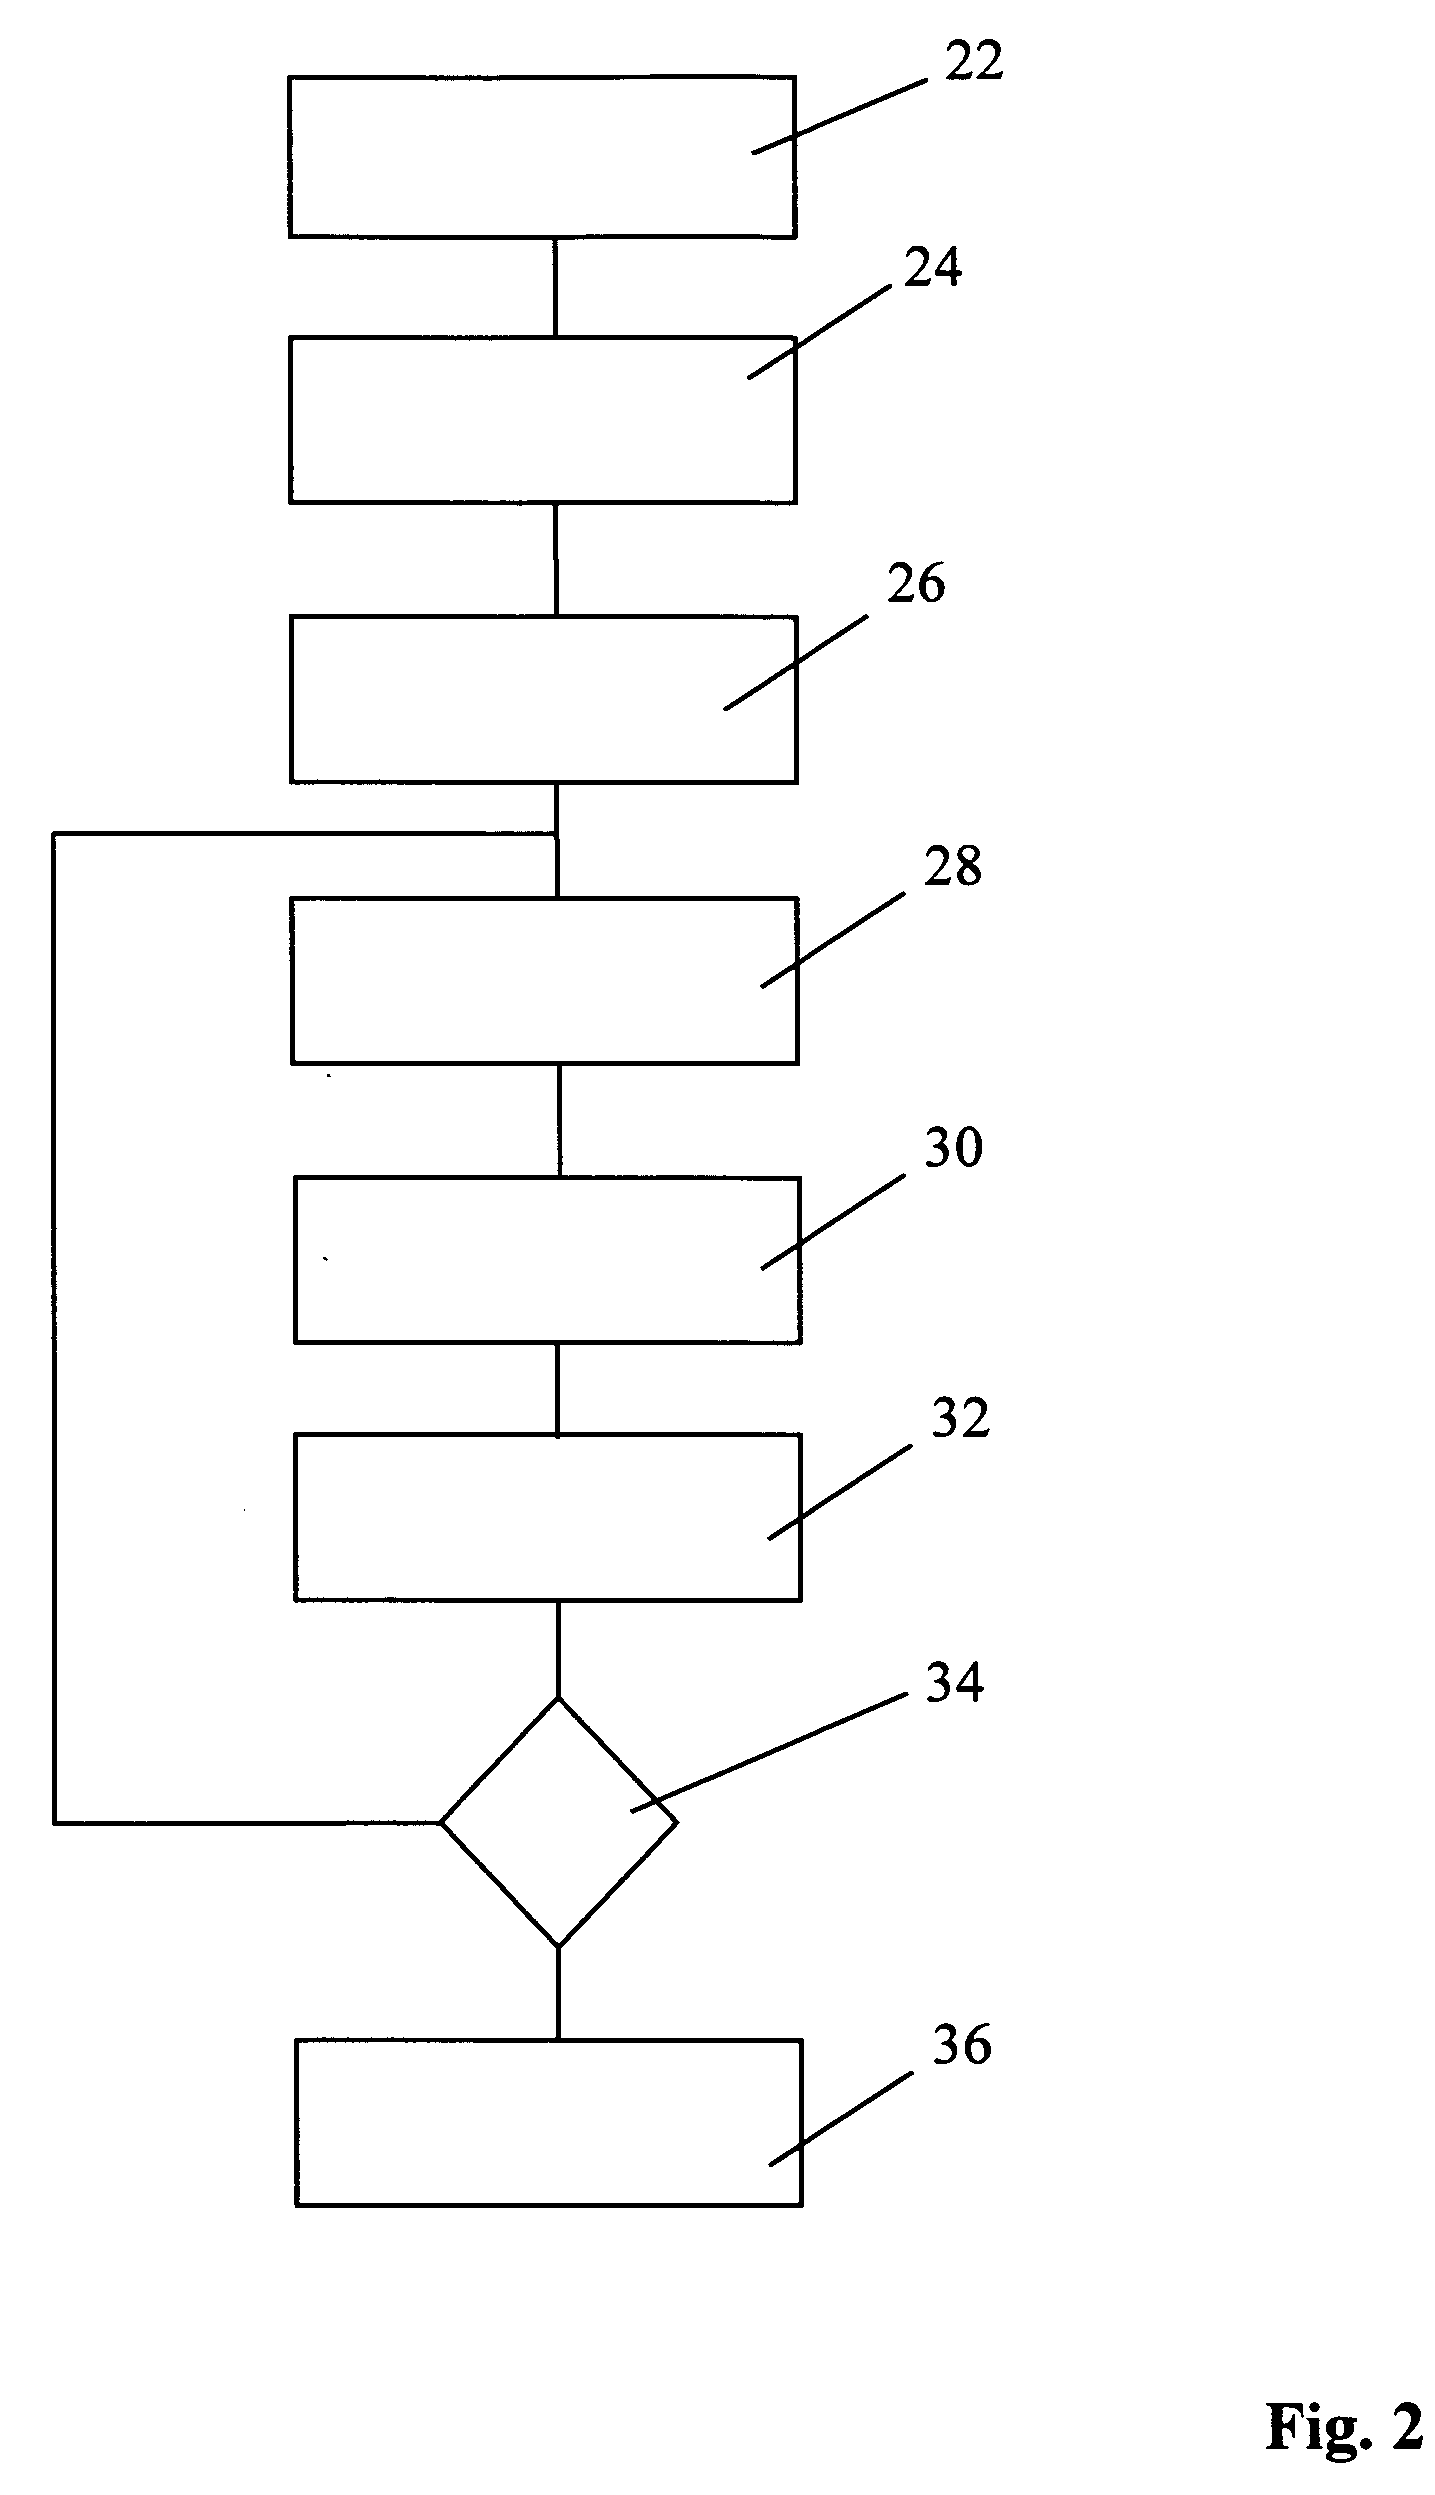 Method for matching a model spectrum to a measured spectrum